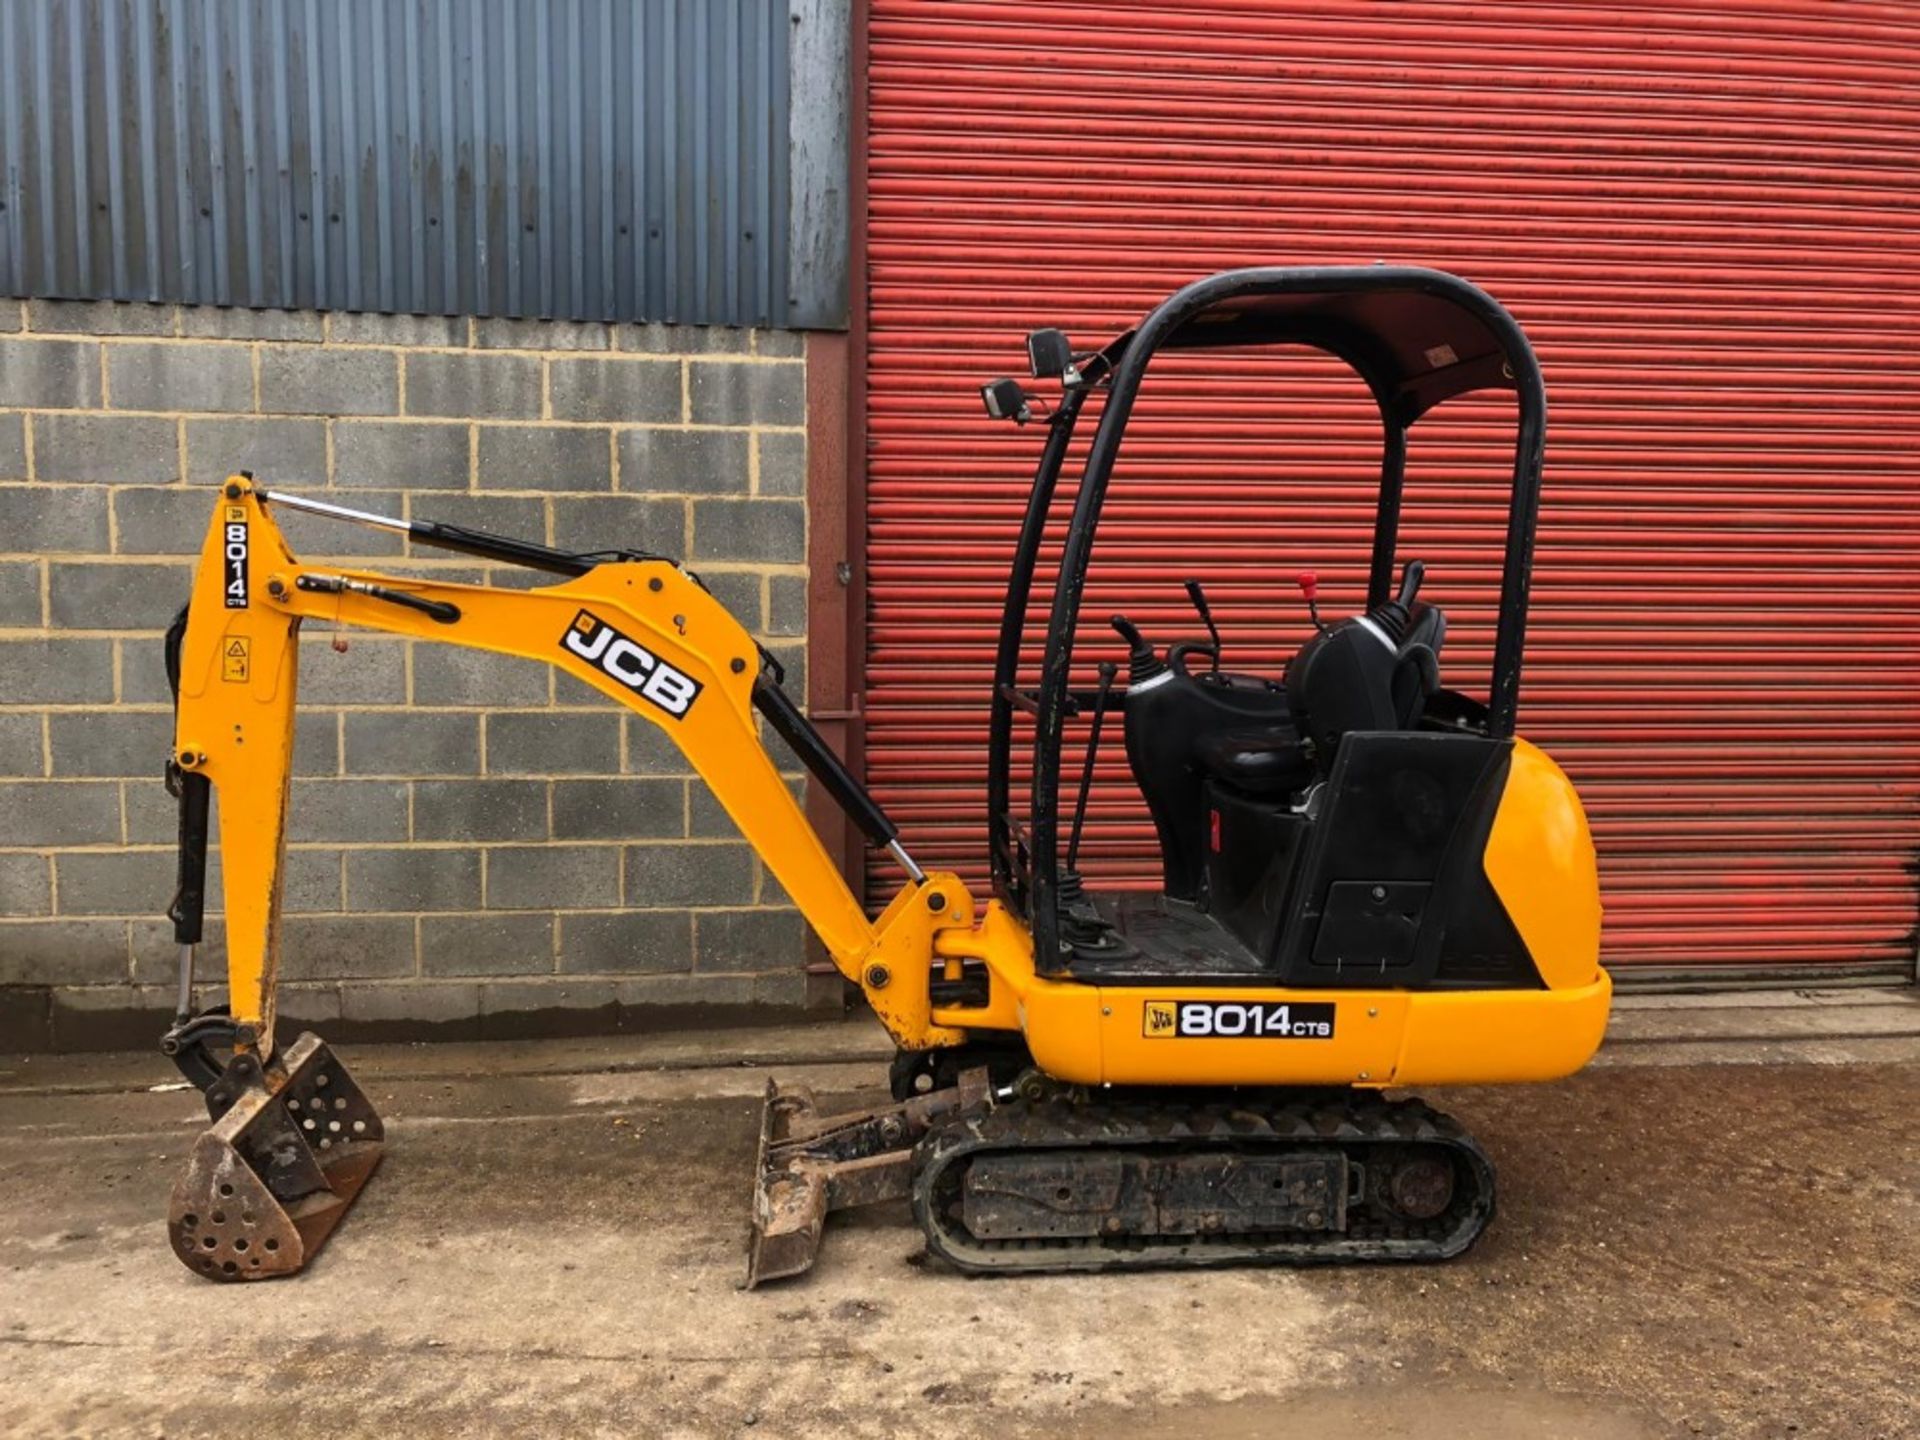 JCB 801-4 MINI DIGGER, YEAR 2016 BUILD, WITH ONE BUCKET. . 1025 RECORDED HOURS.WHEN TESTED WAS